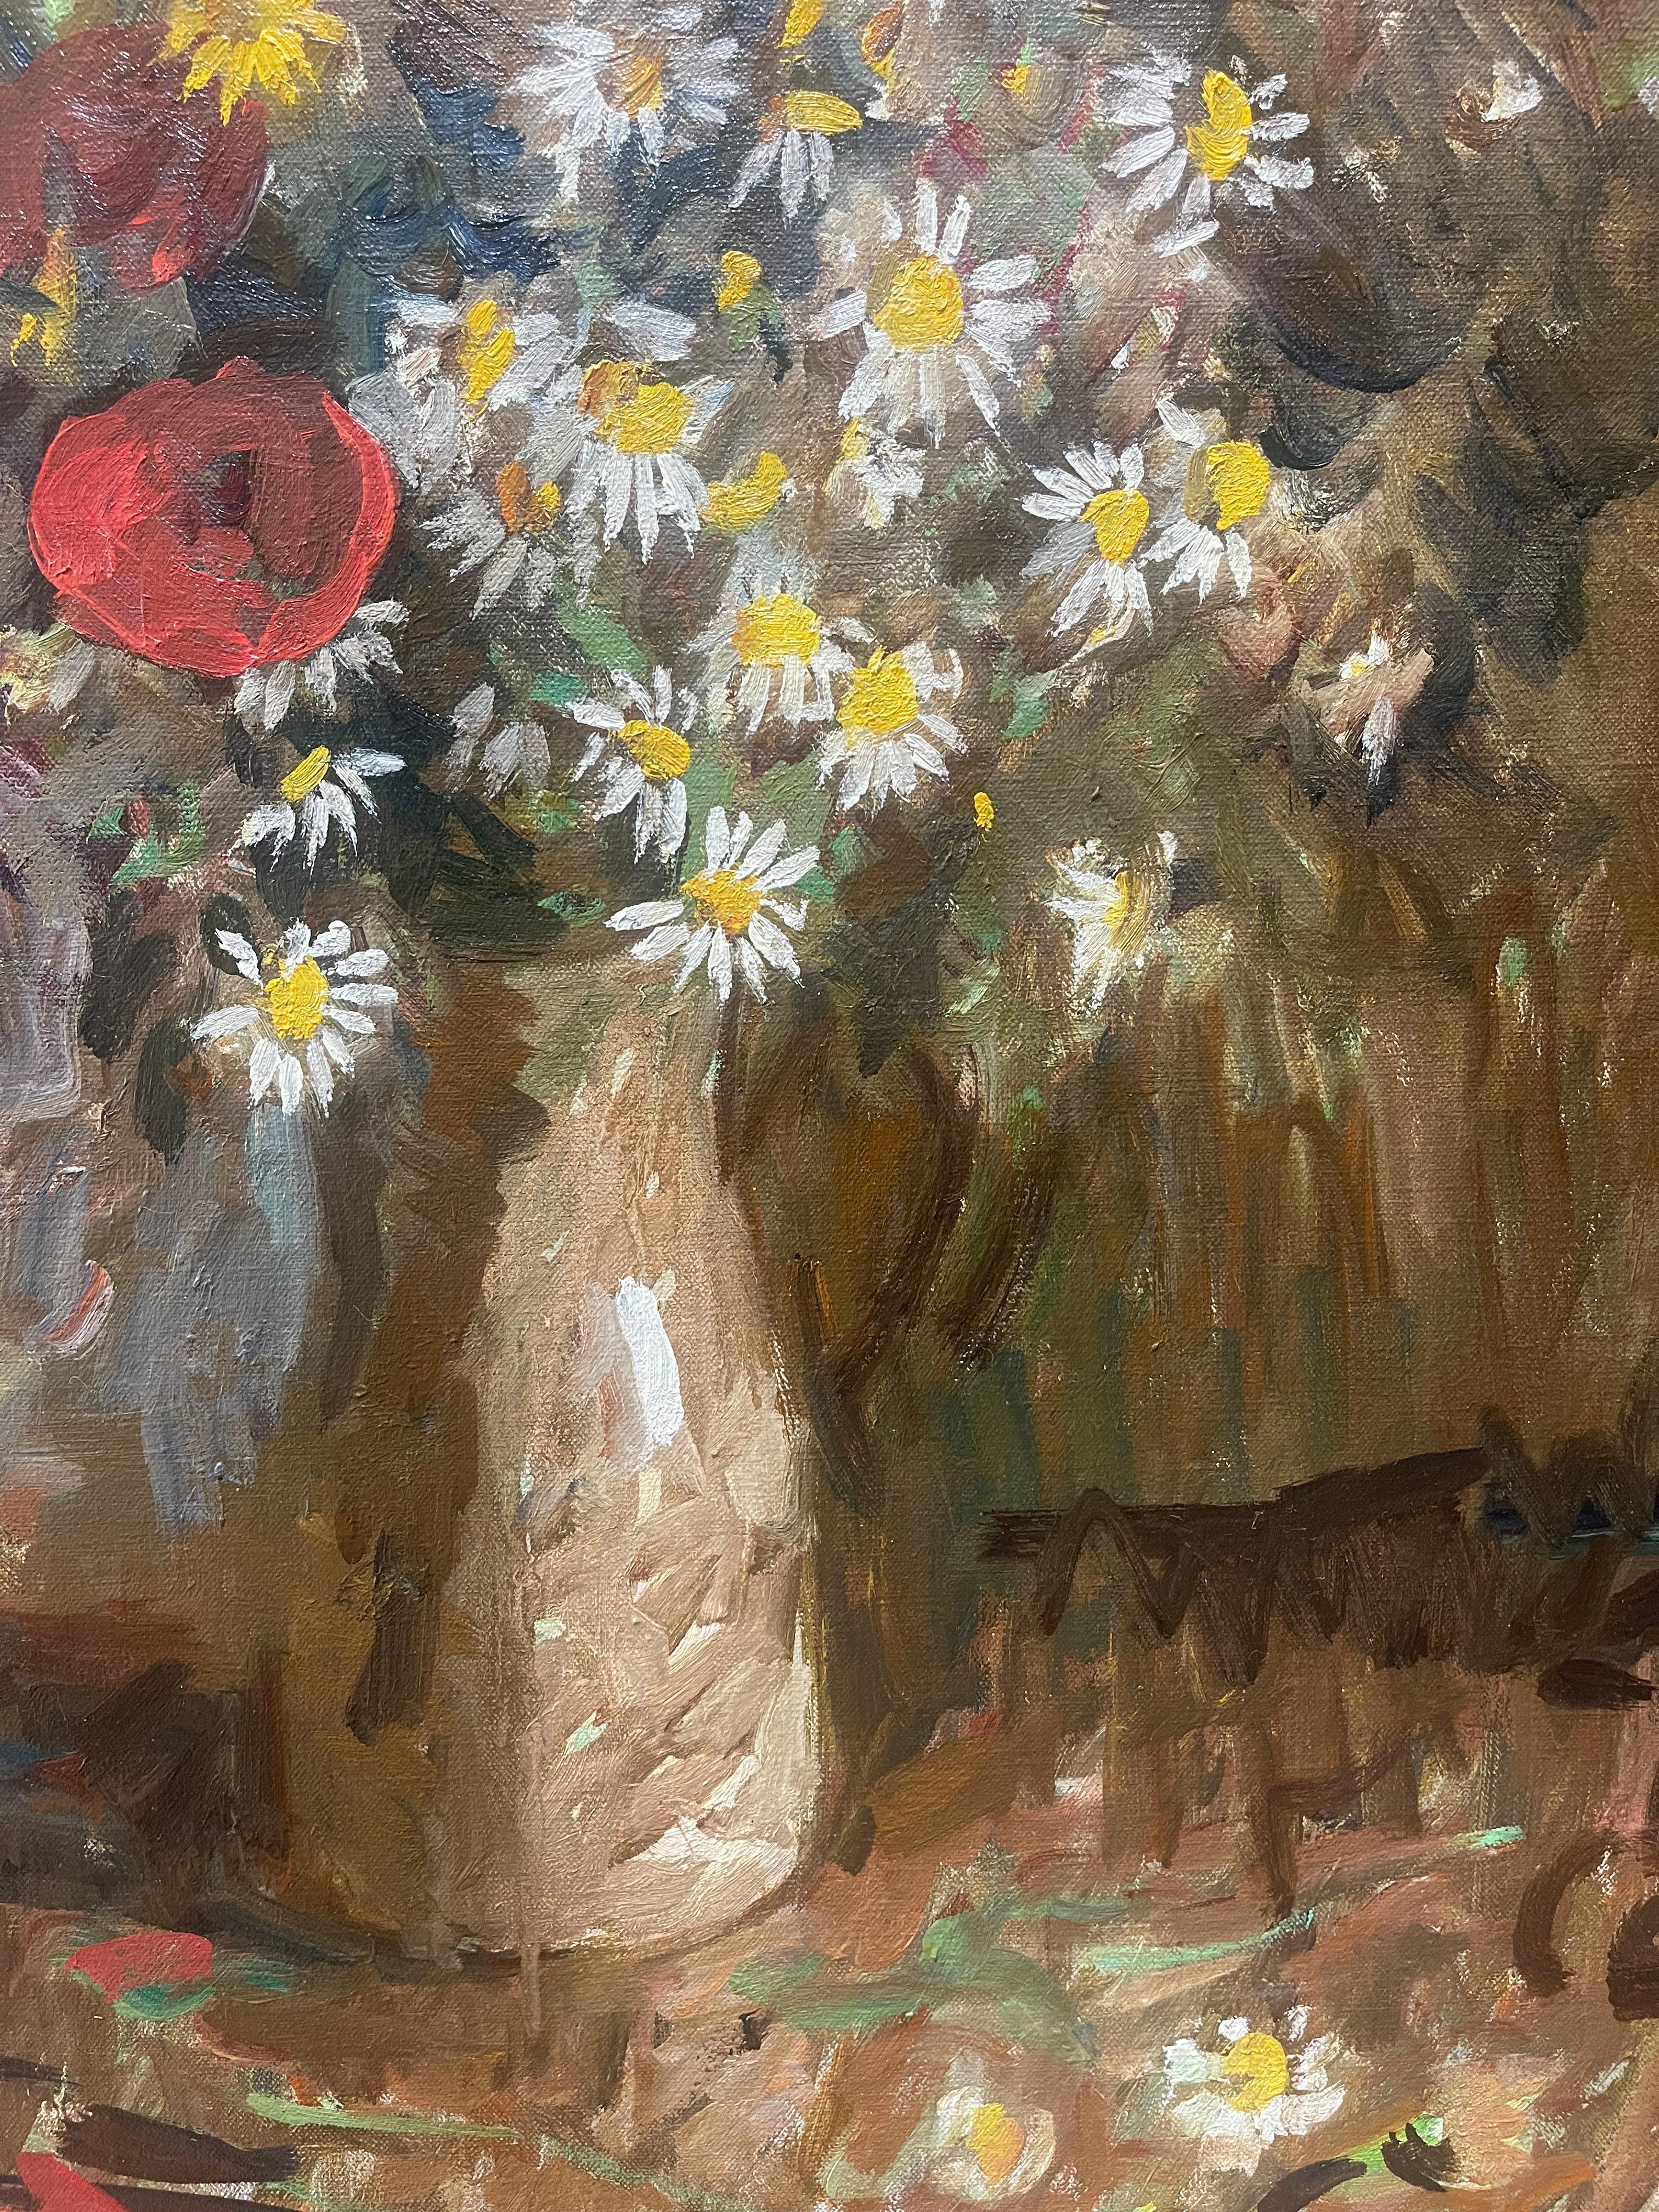 Freshly picked wildflowers are the star of this canvas—poppies and chamomile in their full imperfect glory.

Simple moments are heightened and romanticized in Fenske’s work, which recalls an important tenant of 19th century impressionist movement.